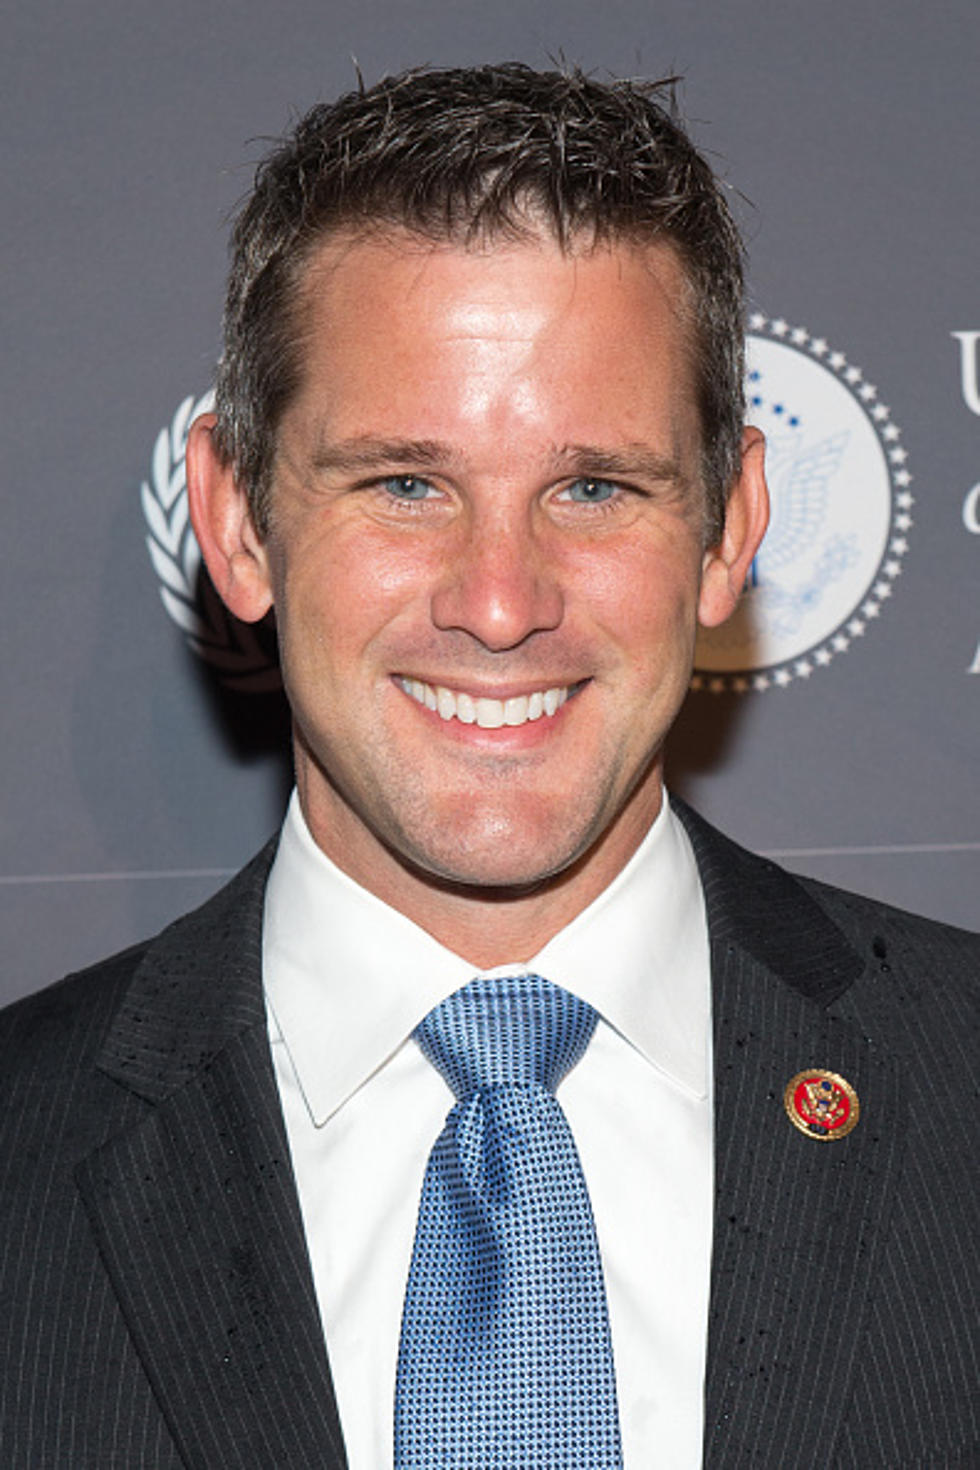 Congressman Kinzinger Visits with the WROK Morning Show